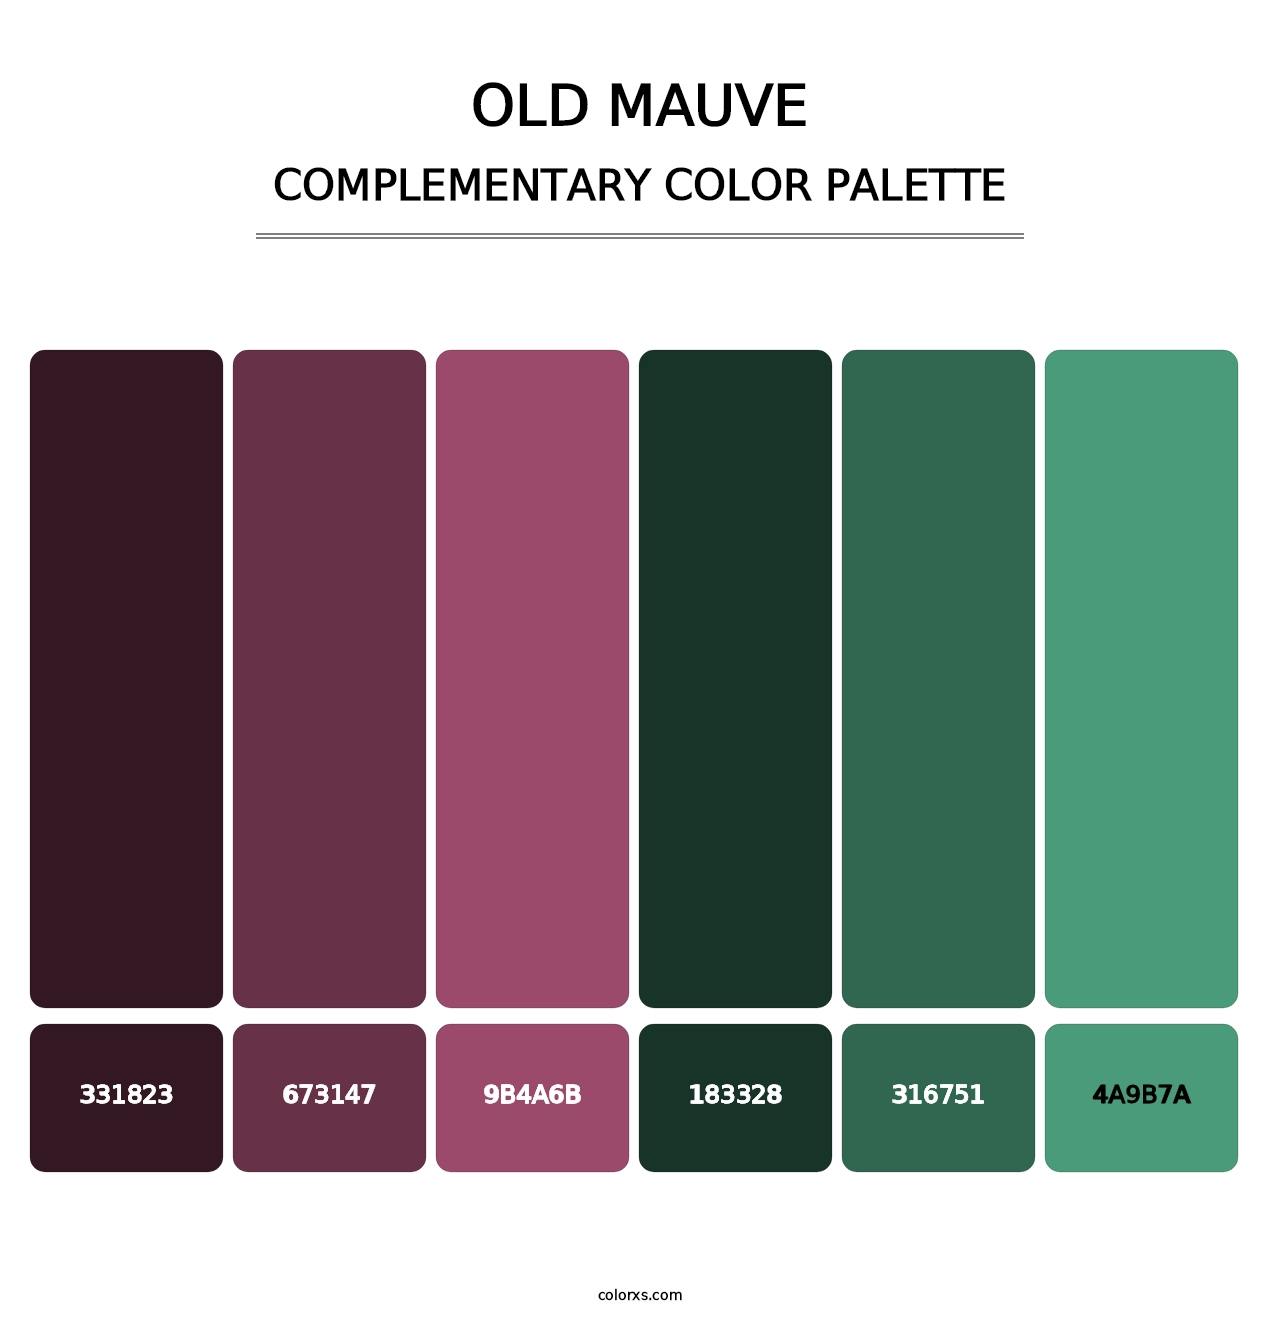 Old Mauve - Complementary Color Palette